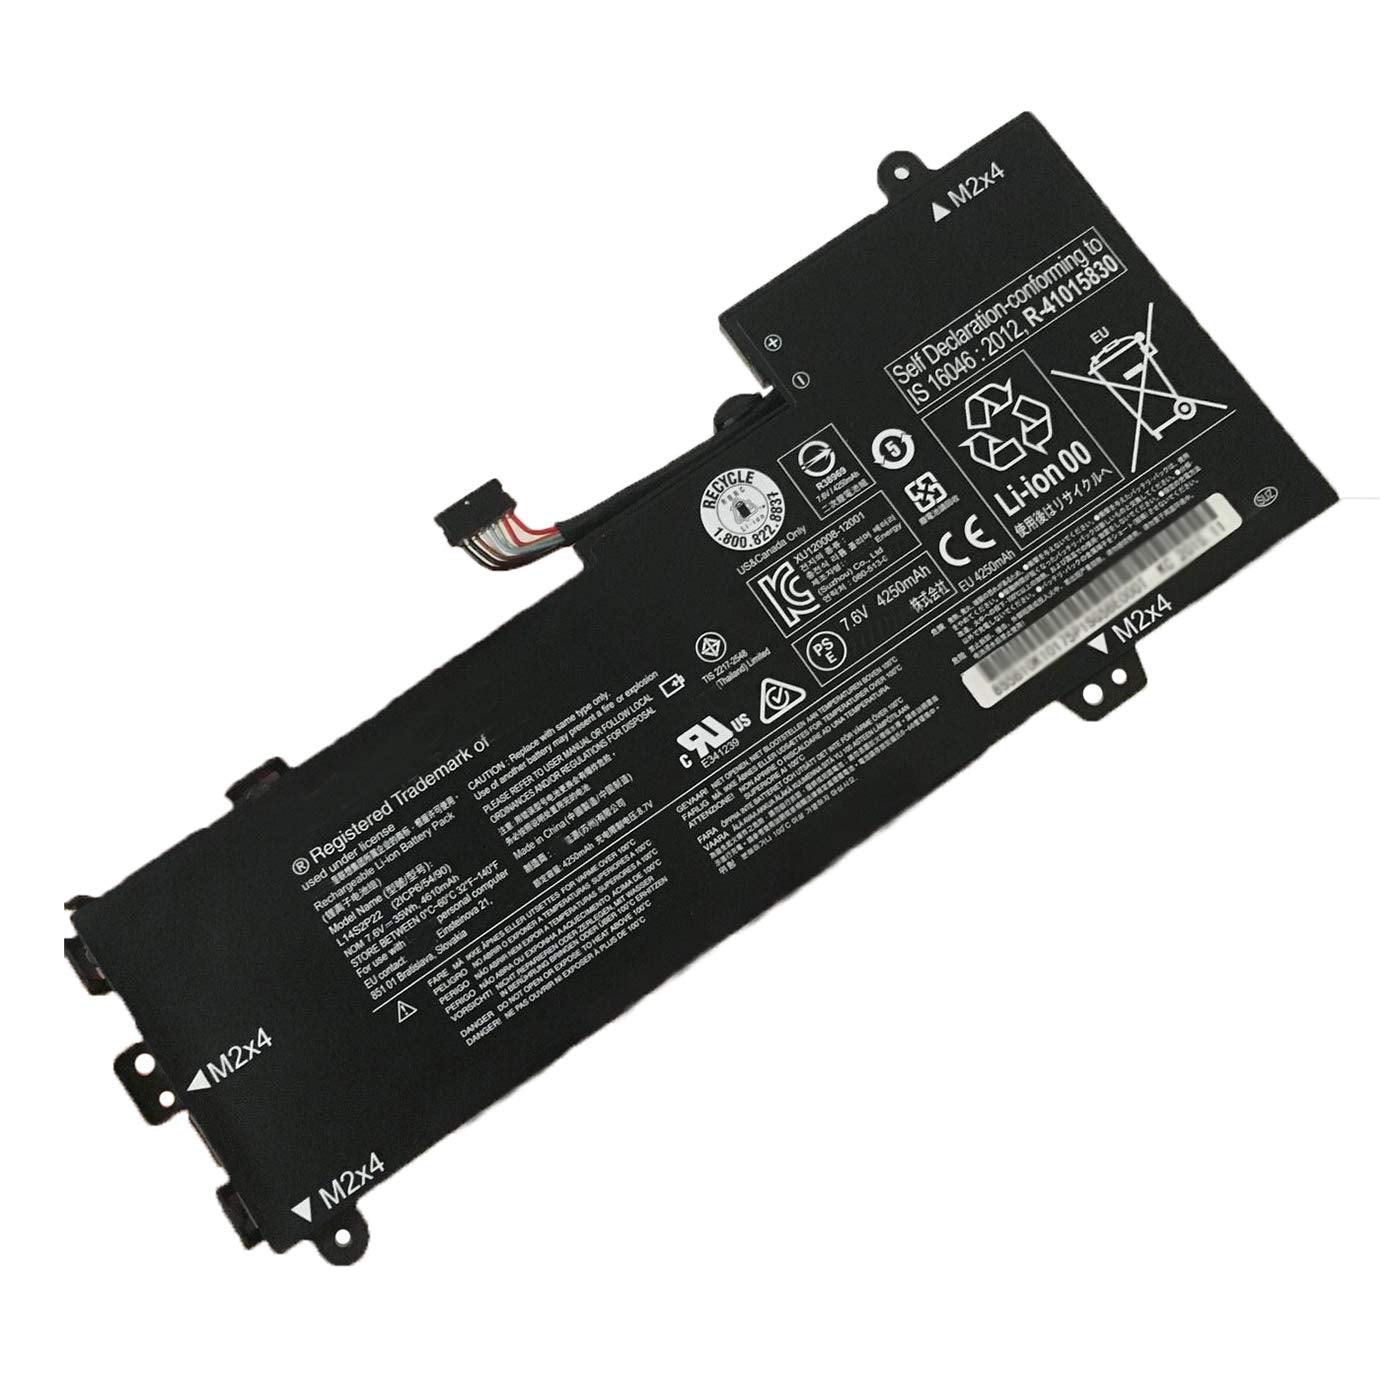 L14M2P23 Lenovo IdeaPad 100-14IBY (80MH007NGE), IdeaPad 100-14IBY (80MH009NGE) Replacement Laptop Battery